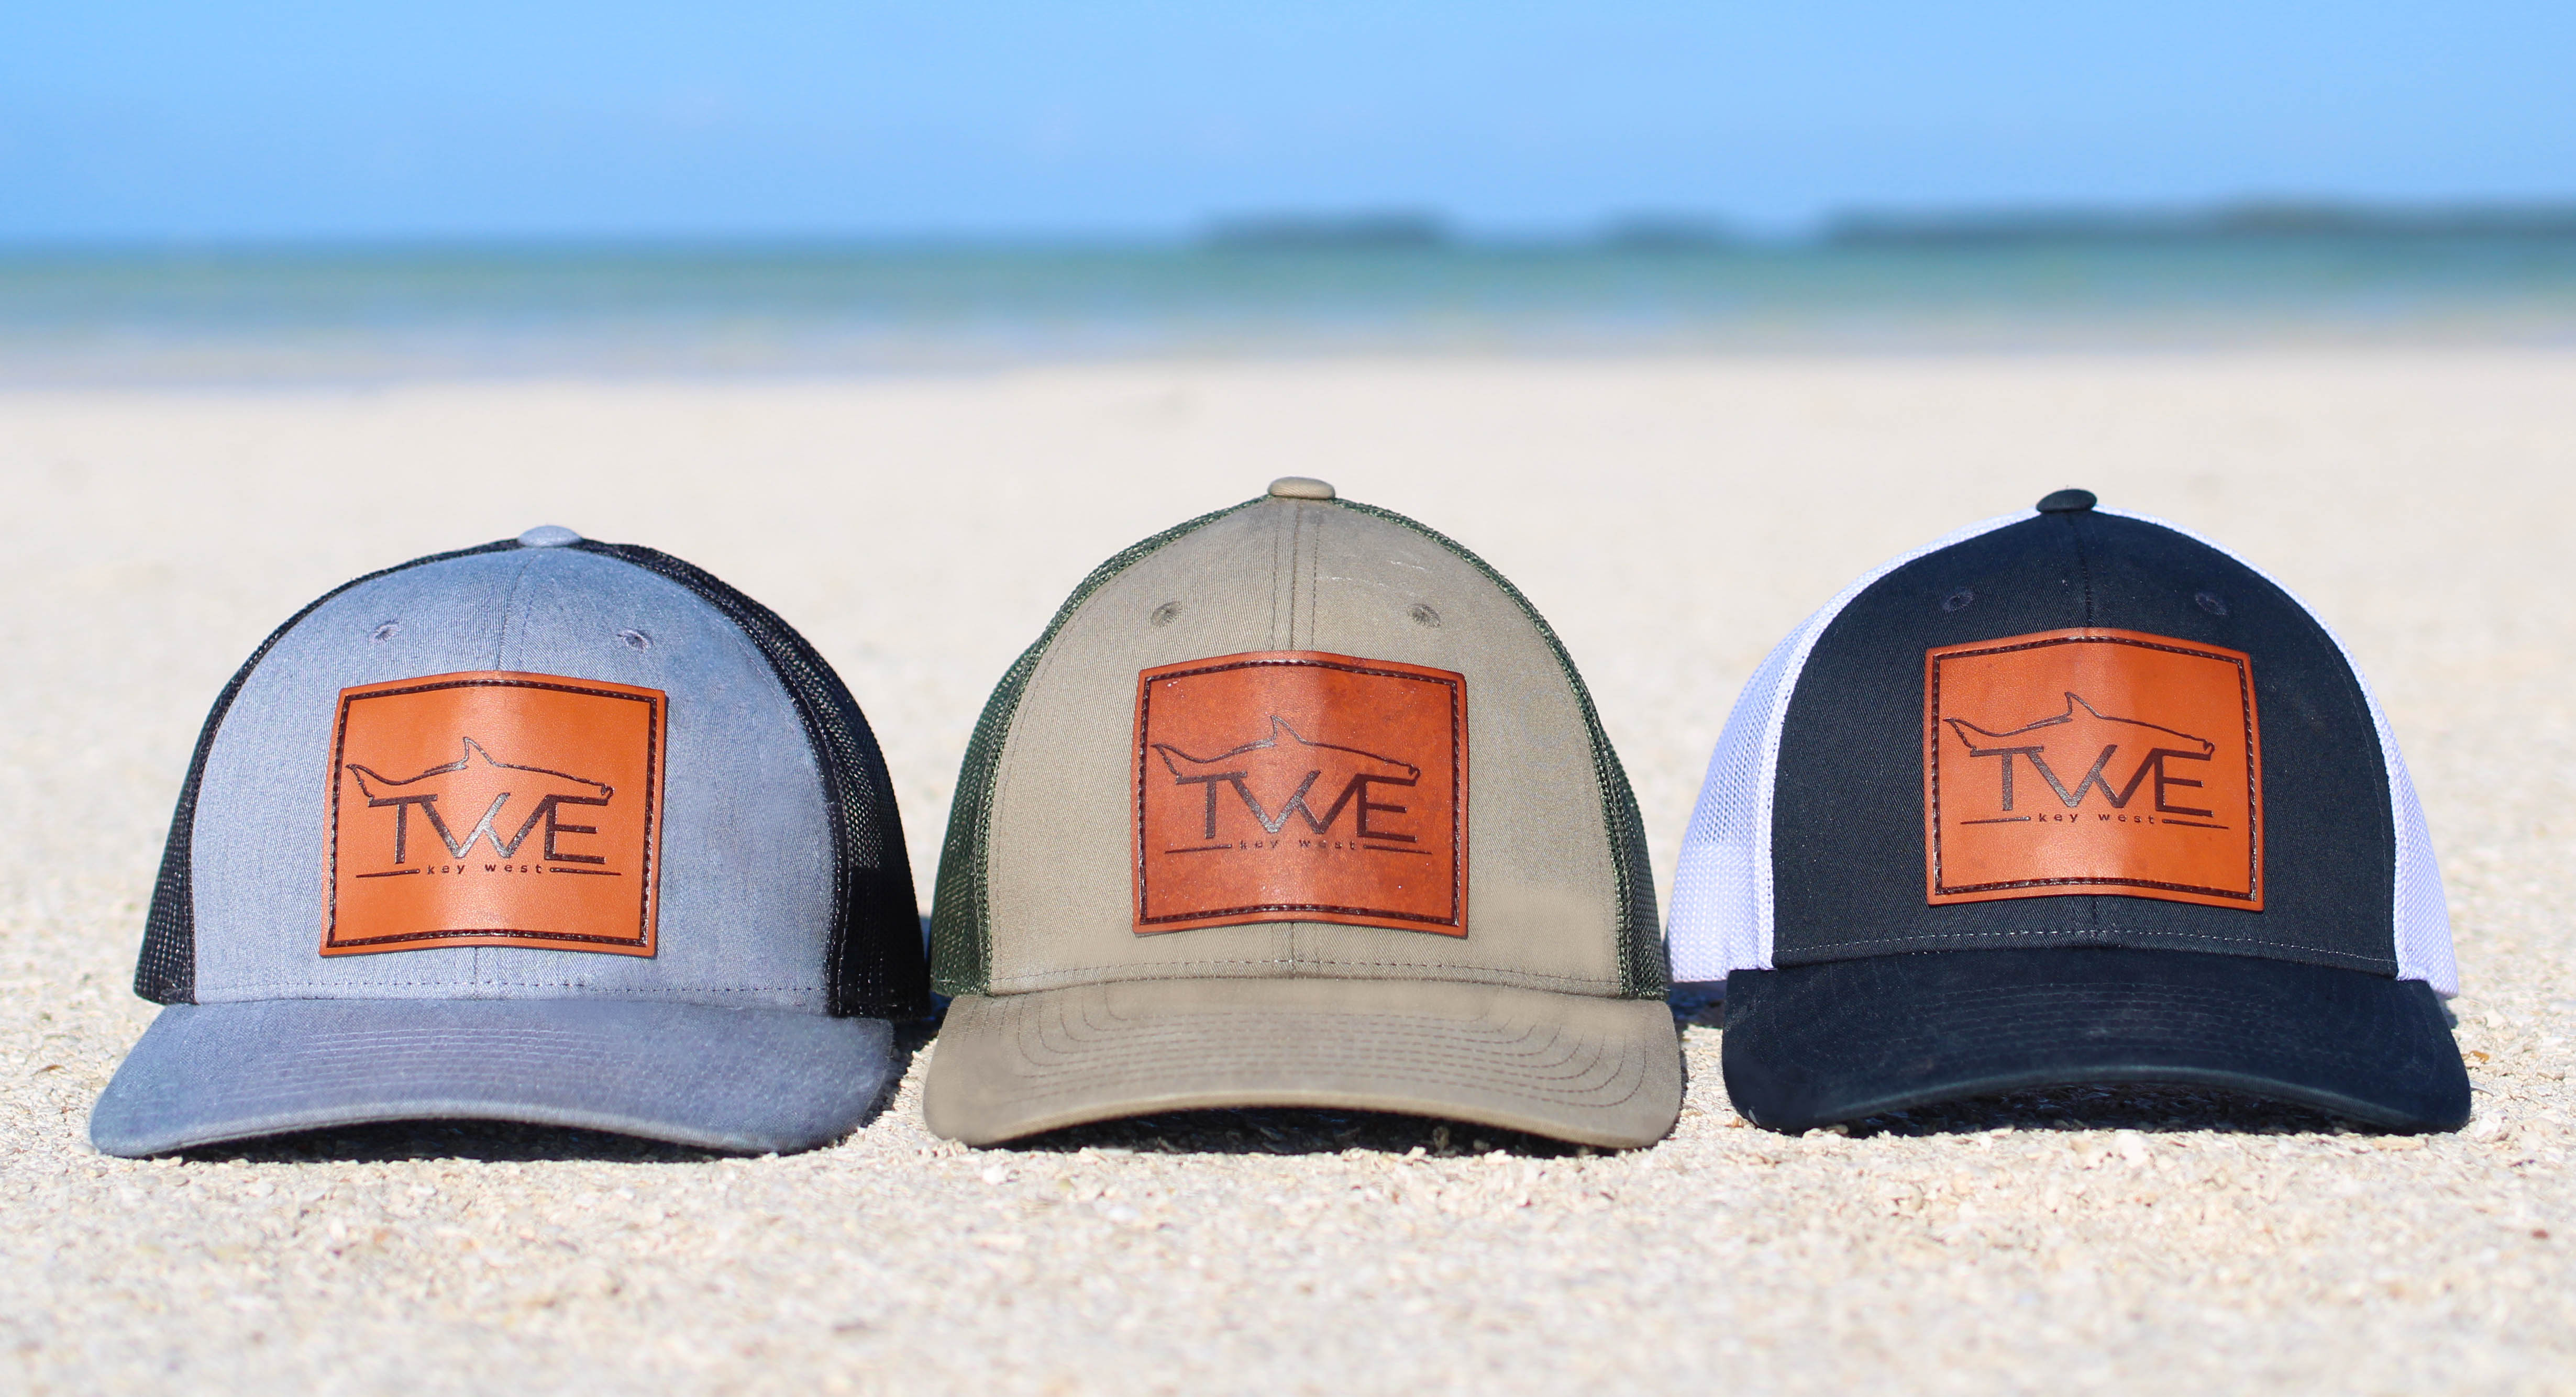 Introducing your new "lucky hat" T.W.E. -- Key West --Hats for sale.